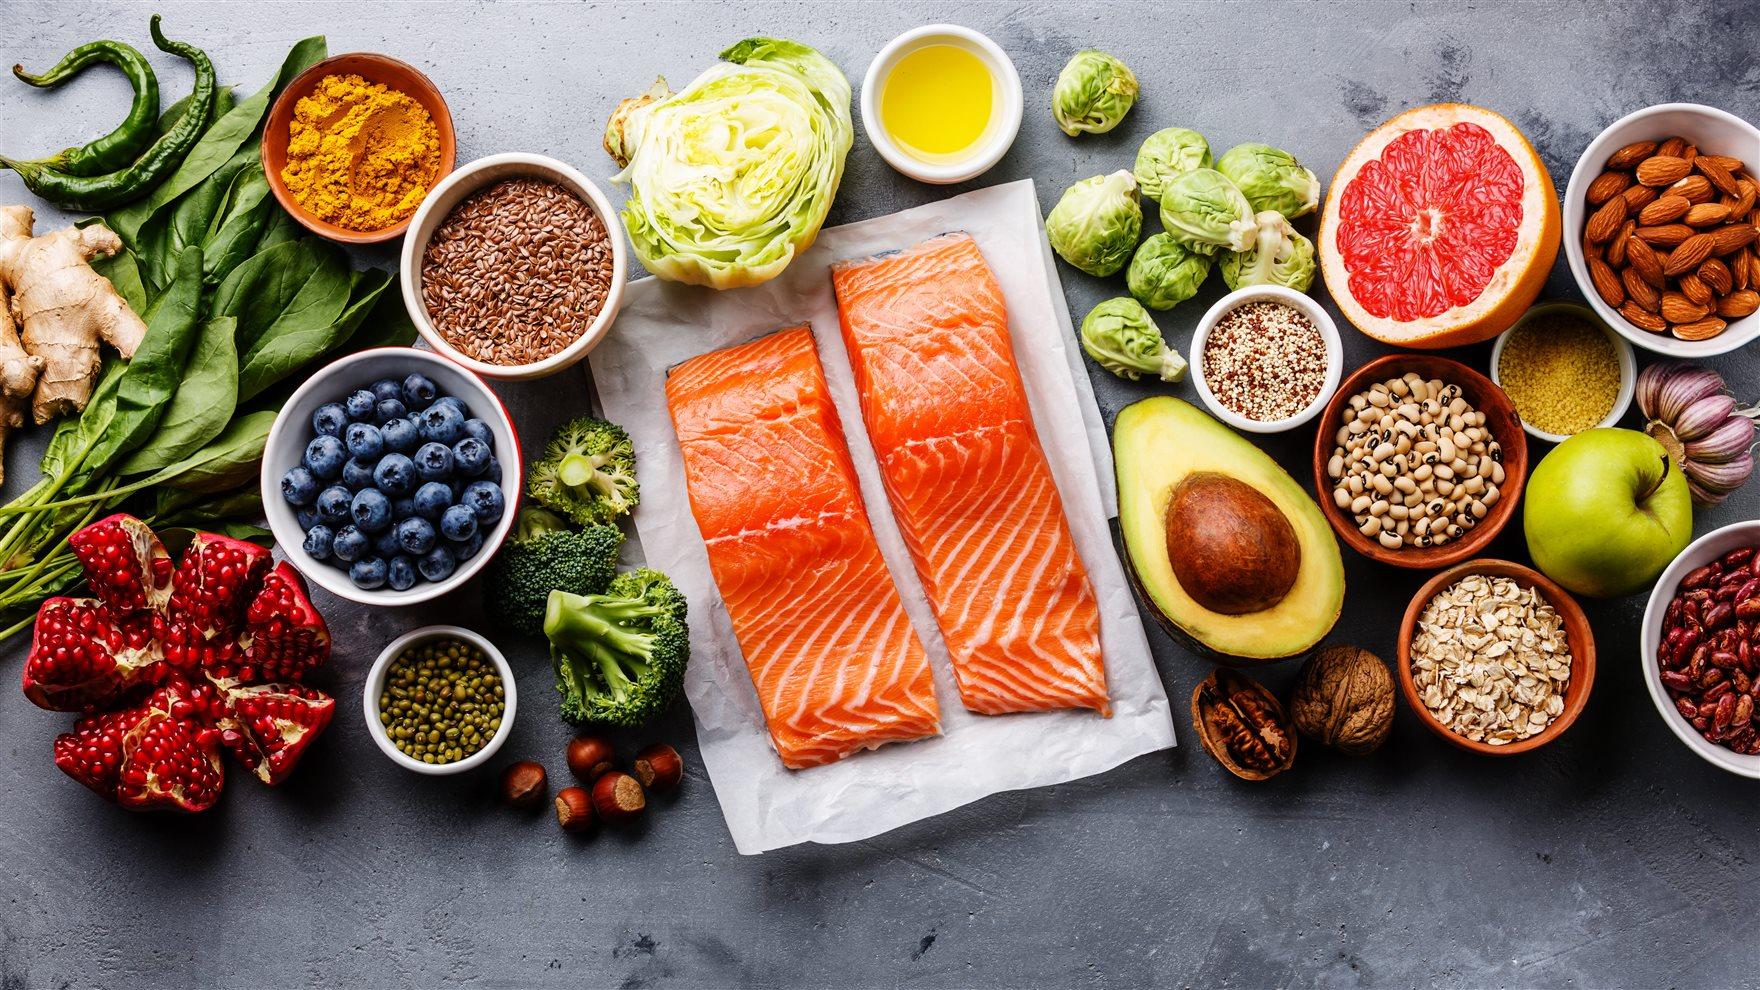 A row of healthy foods including berries, avocados and salmon.